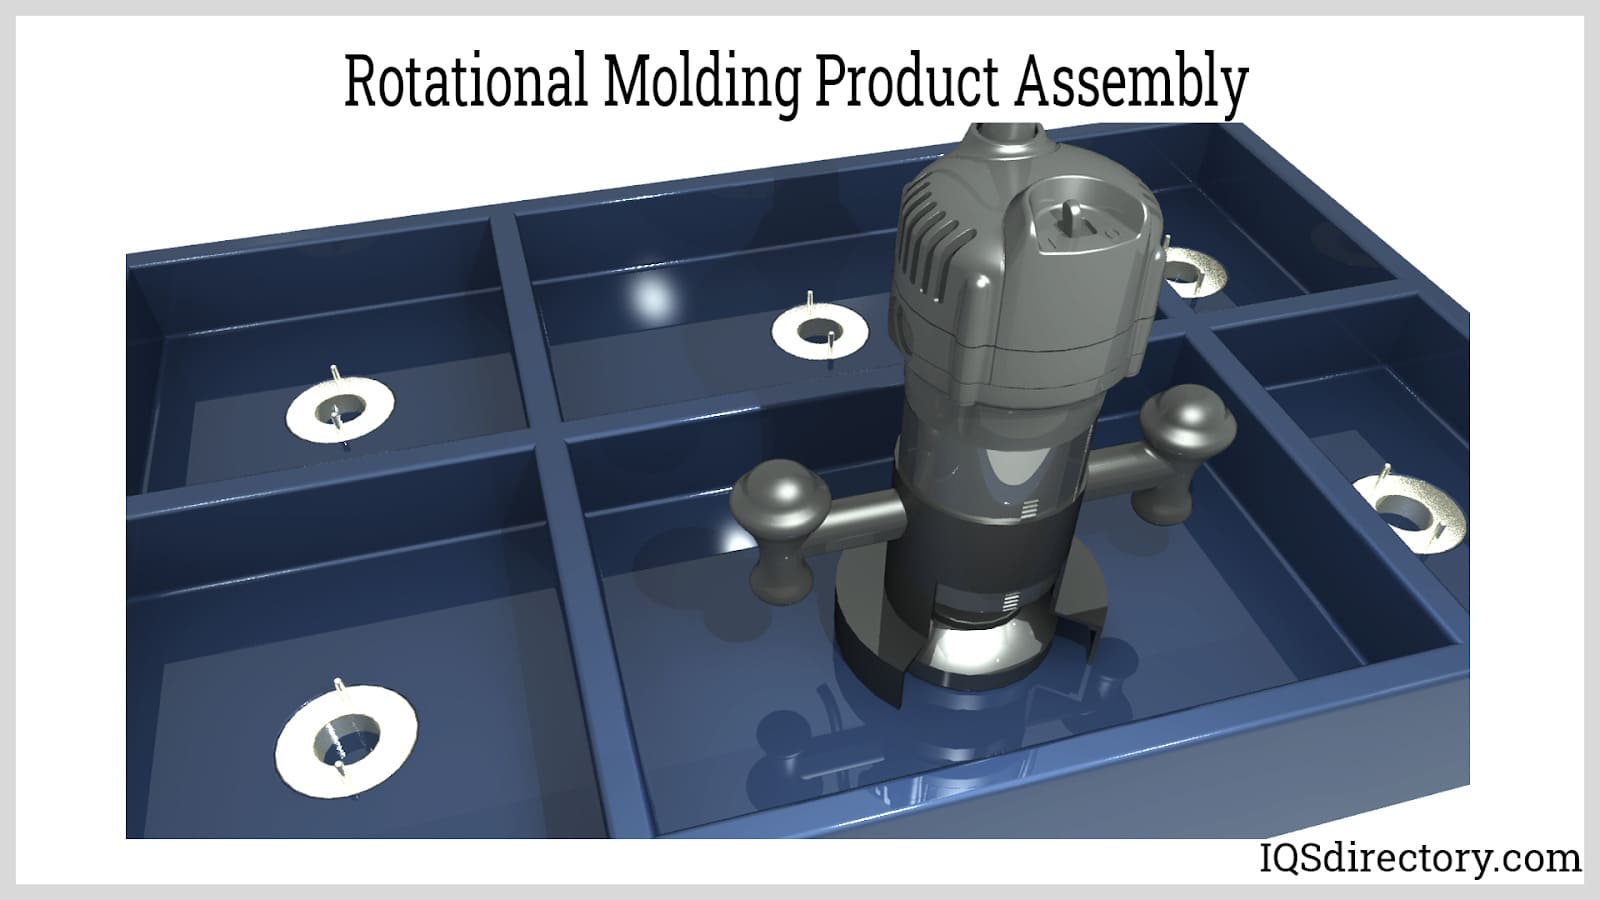 Rotational Molding Product Assembly